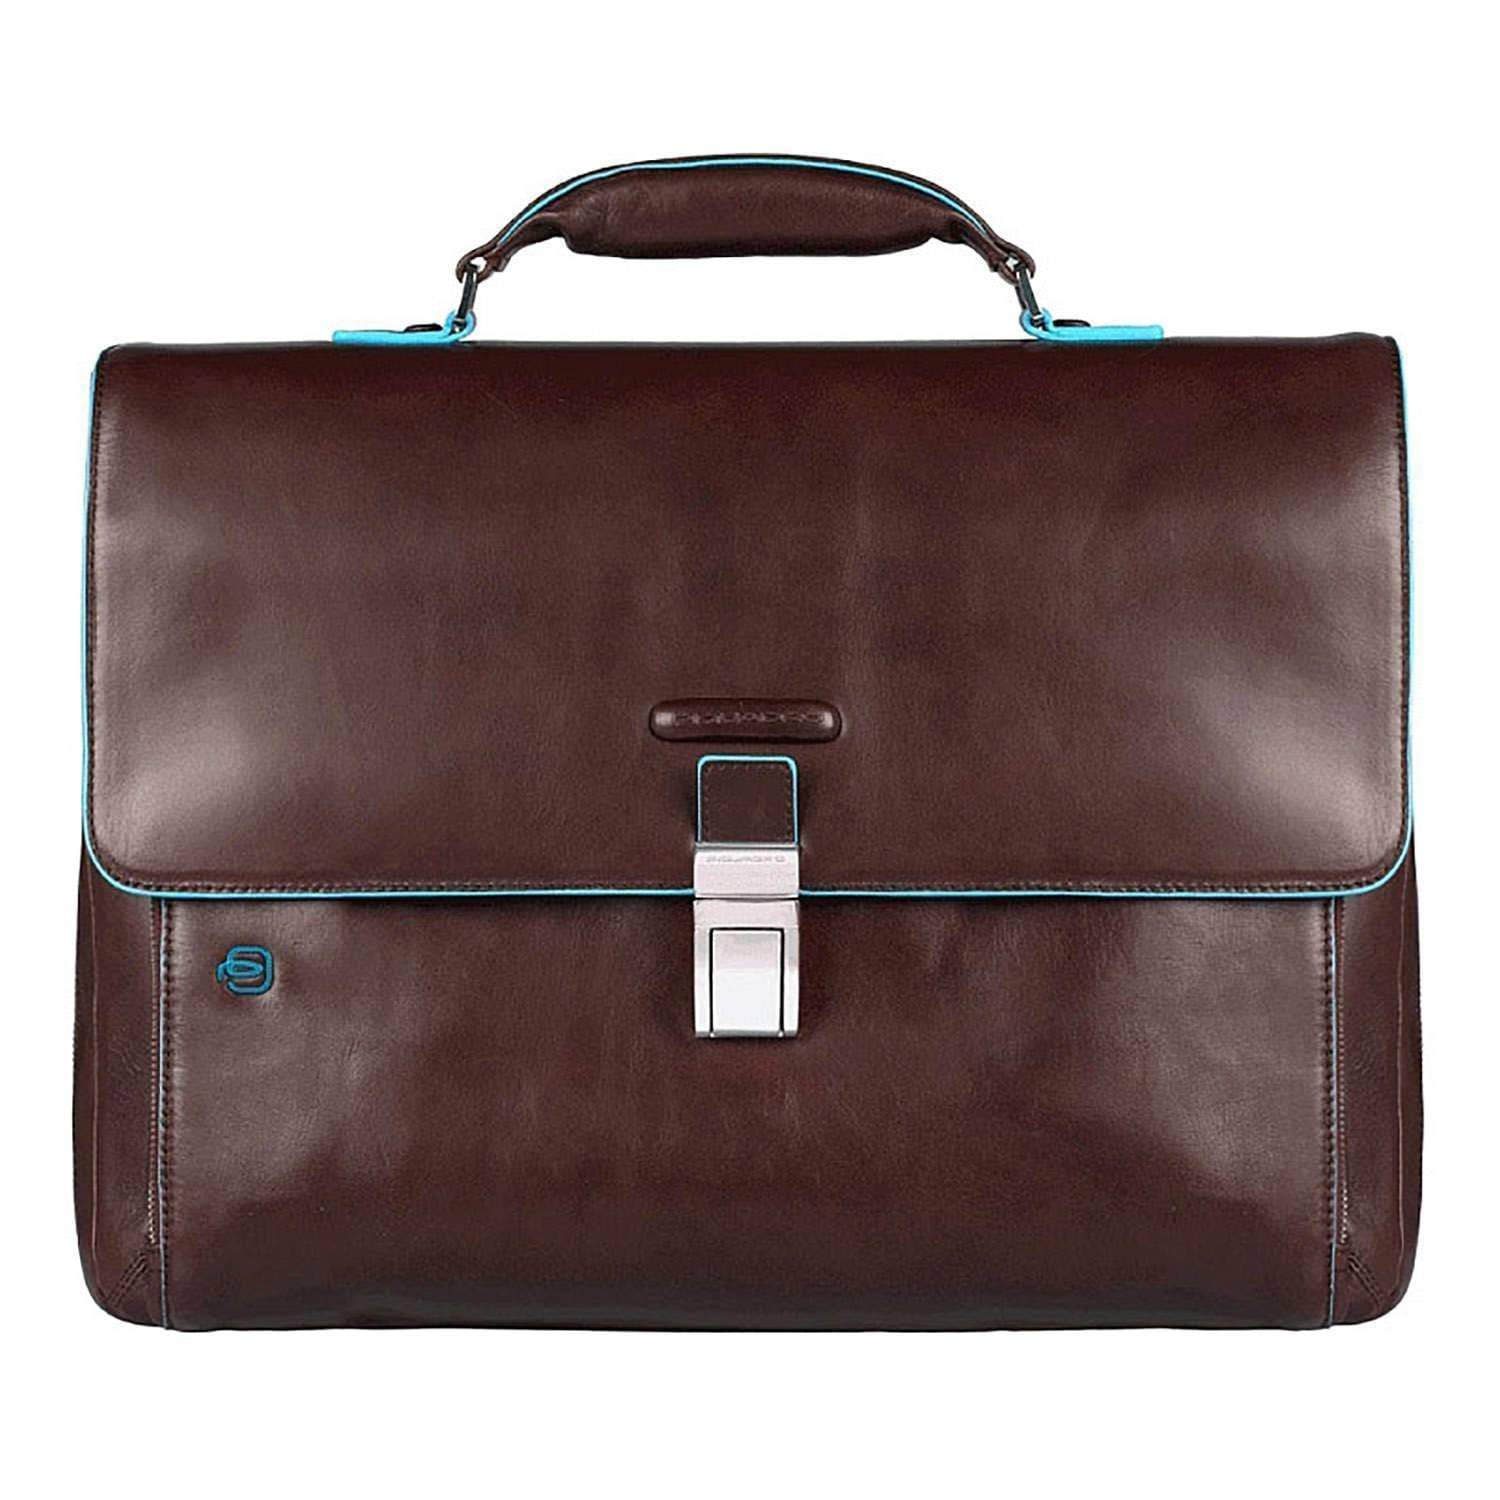 Piquadro Blue Square Leather Briefcase with Flap Closure - Mahogany - CA3111B2/MO - Jashanmal Home